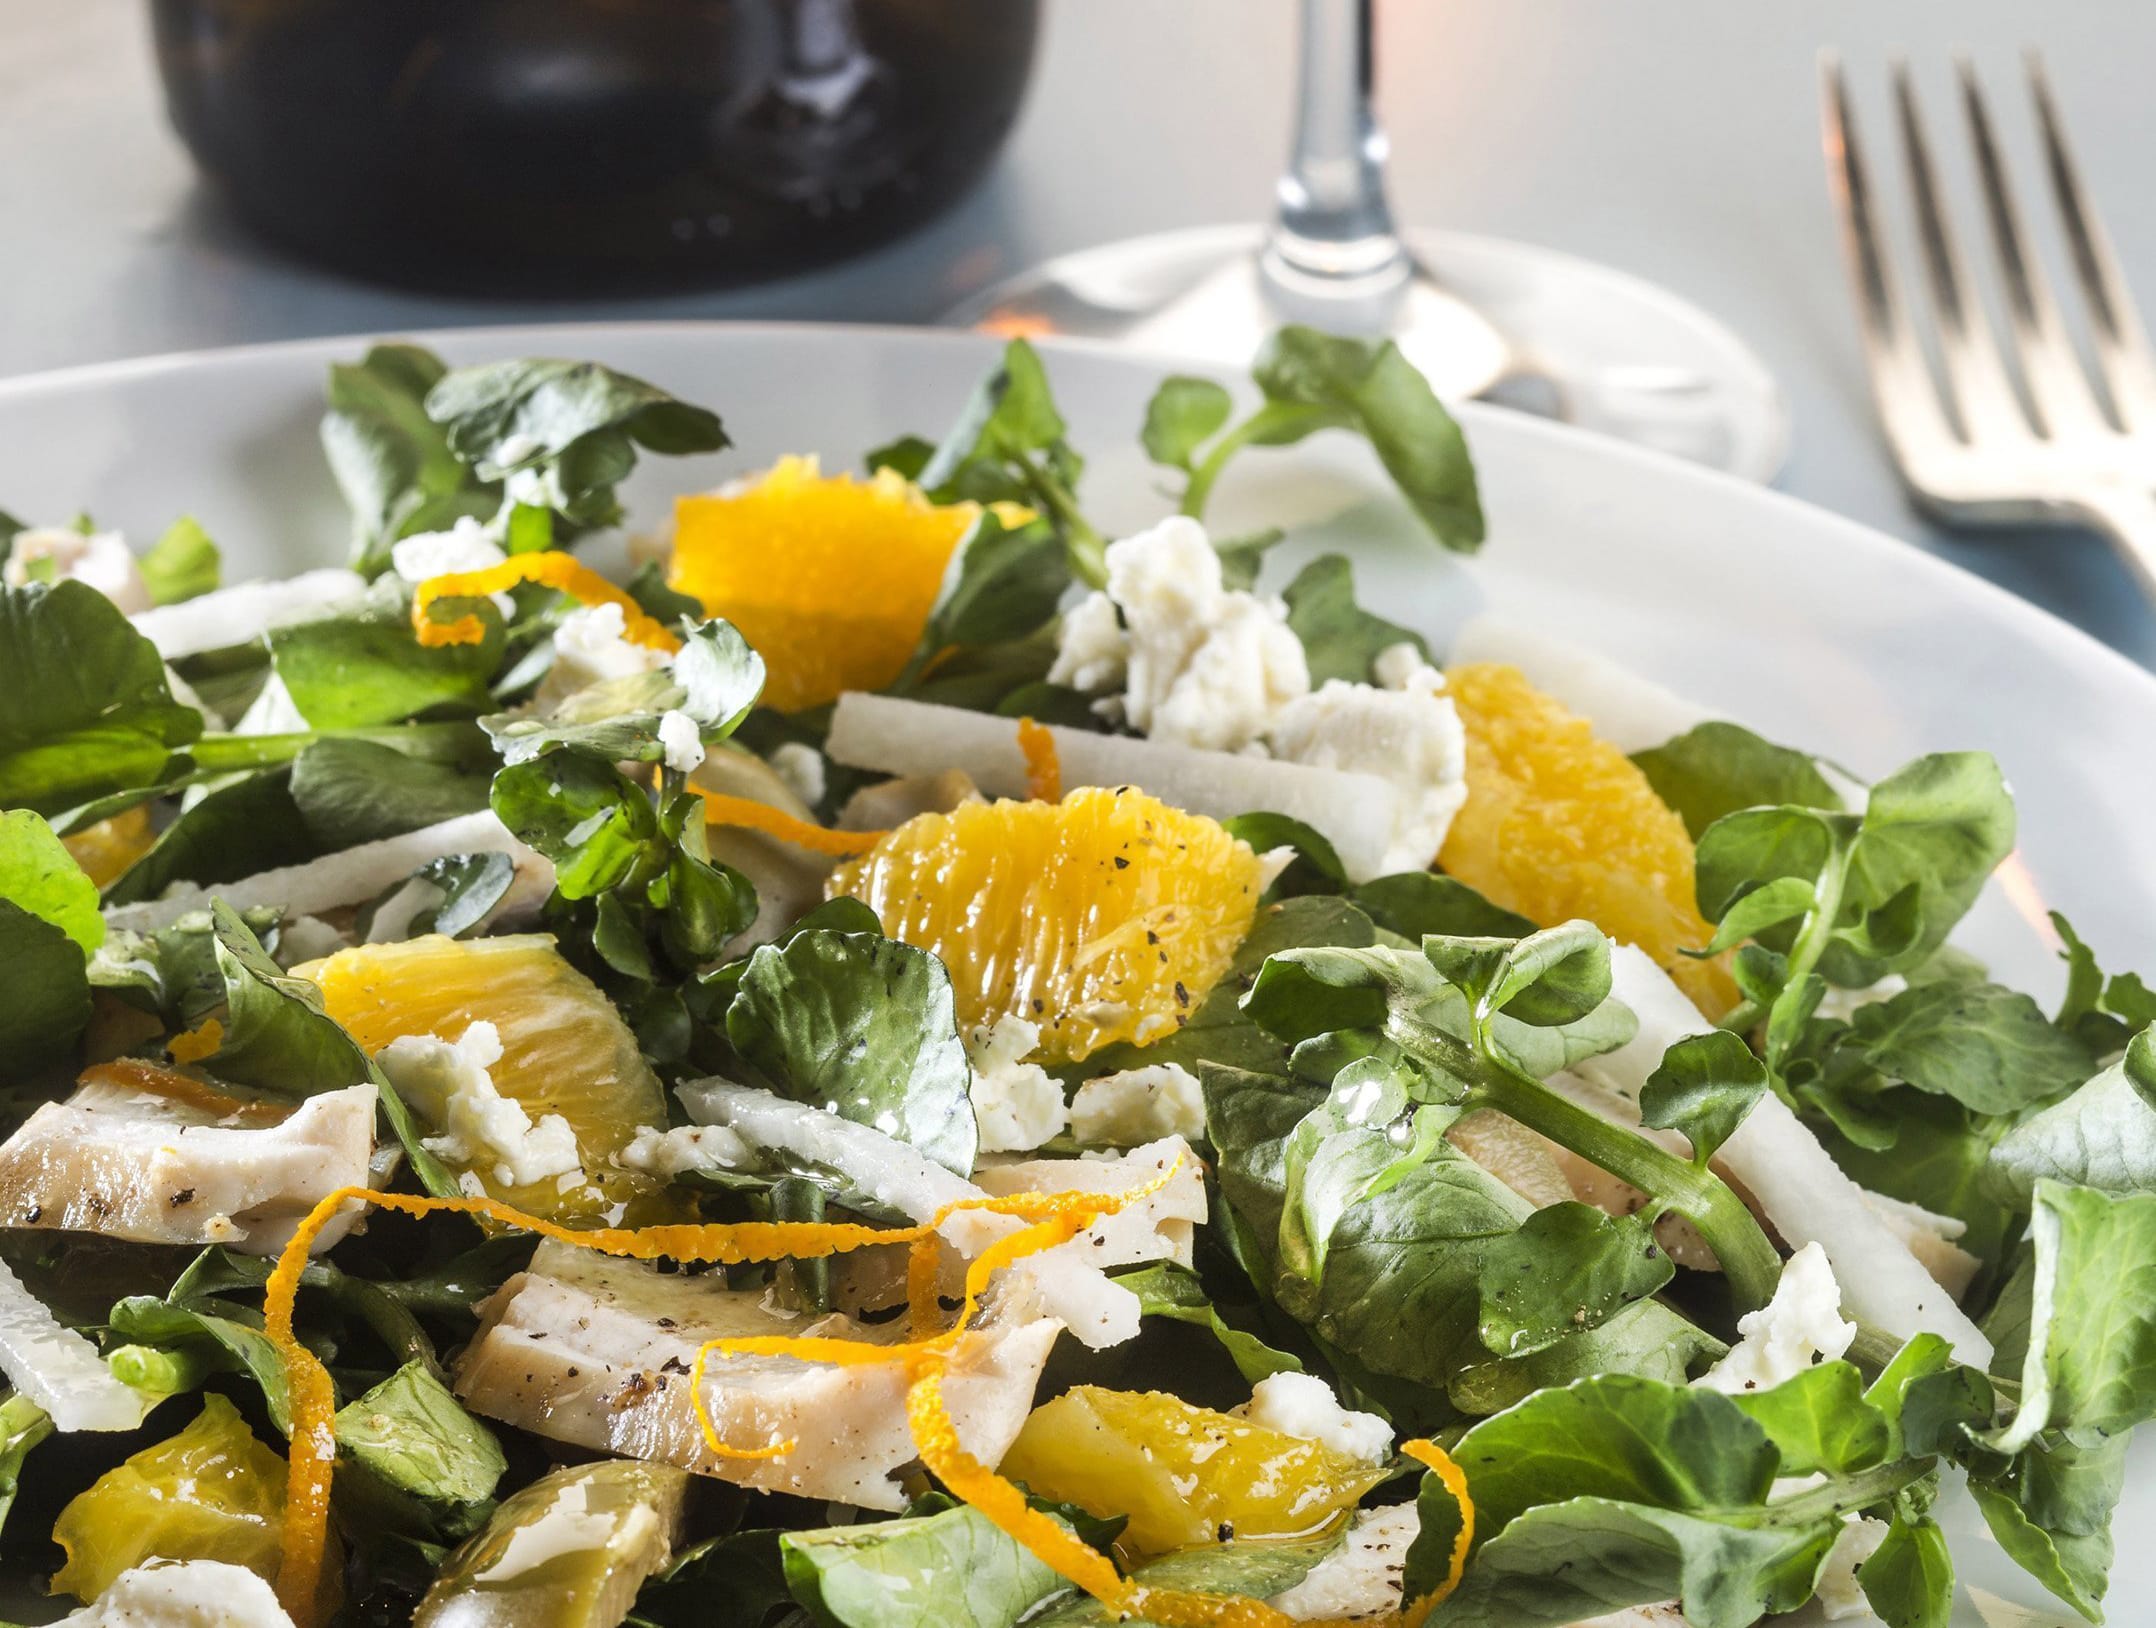 Crisp, peppery watercress takes a starring role in this summer salad.